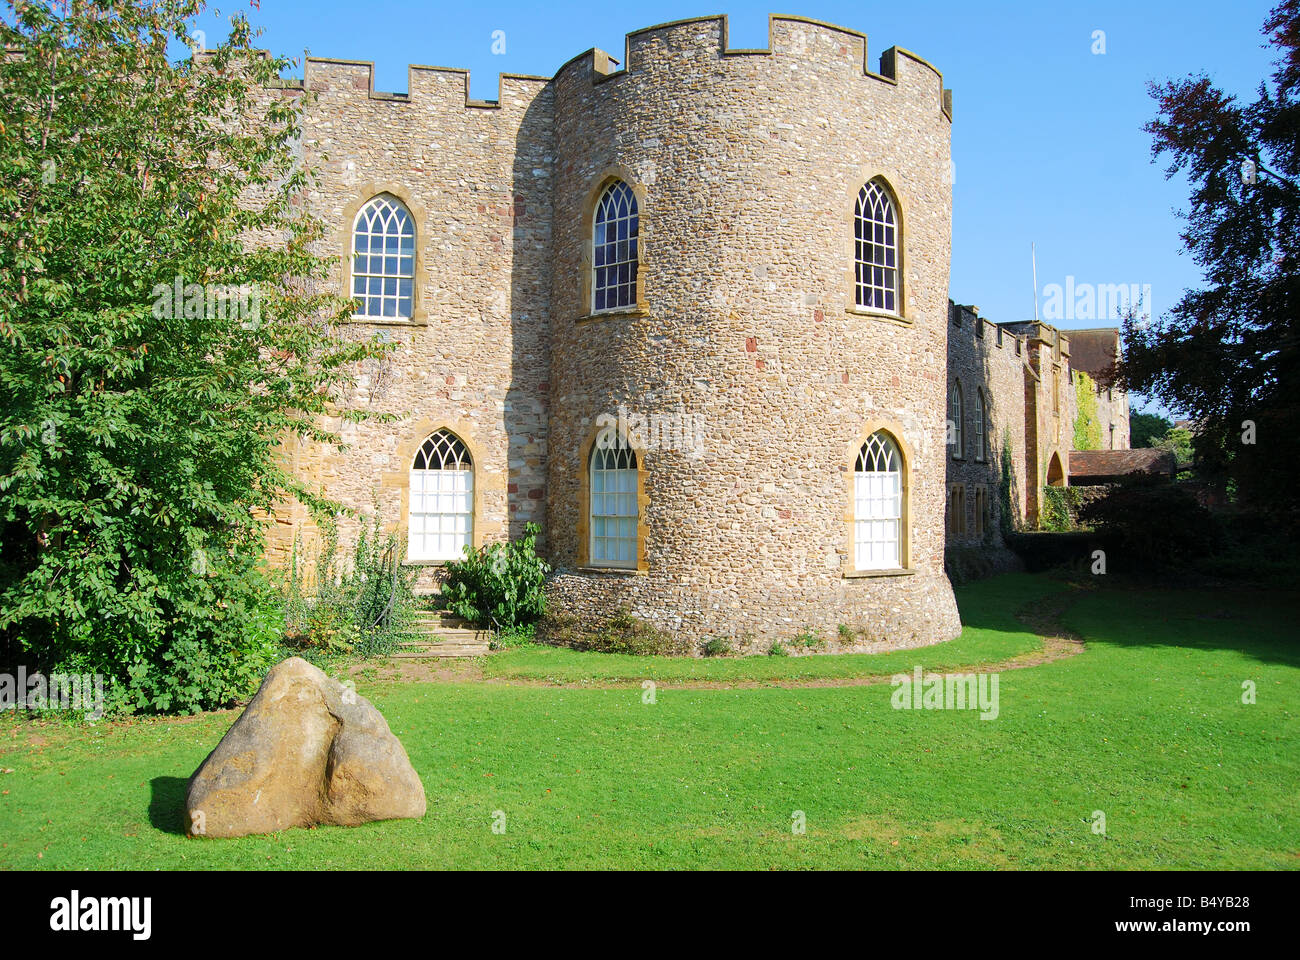 Outer wall and tower, Taunton Castle, Taunton, Somerset, England, United Kingdom Stock Photo